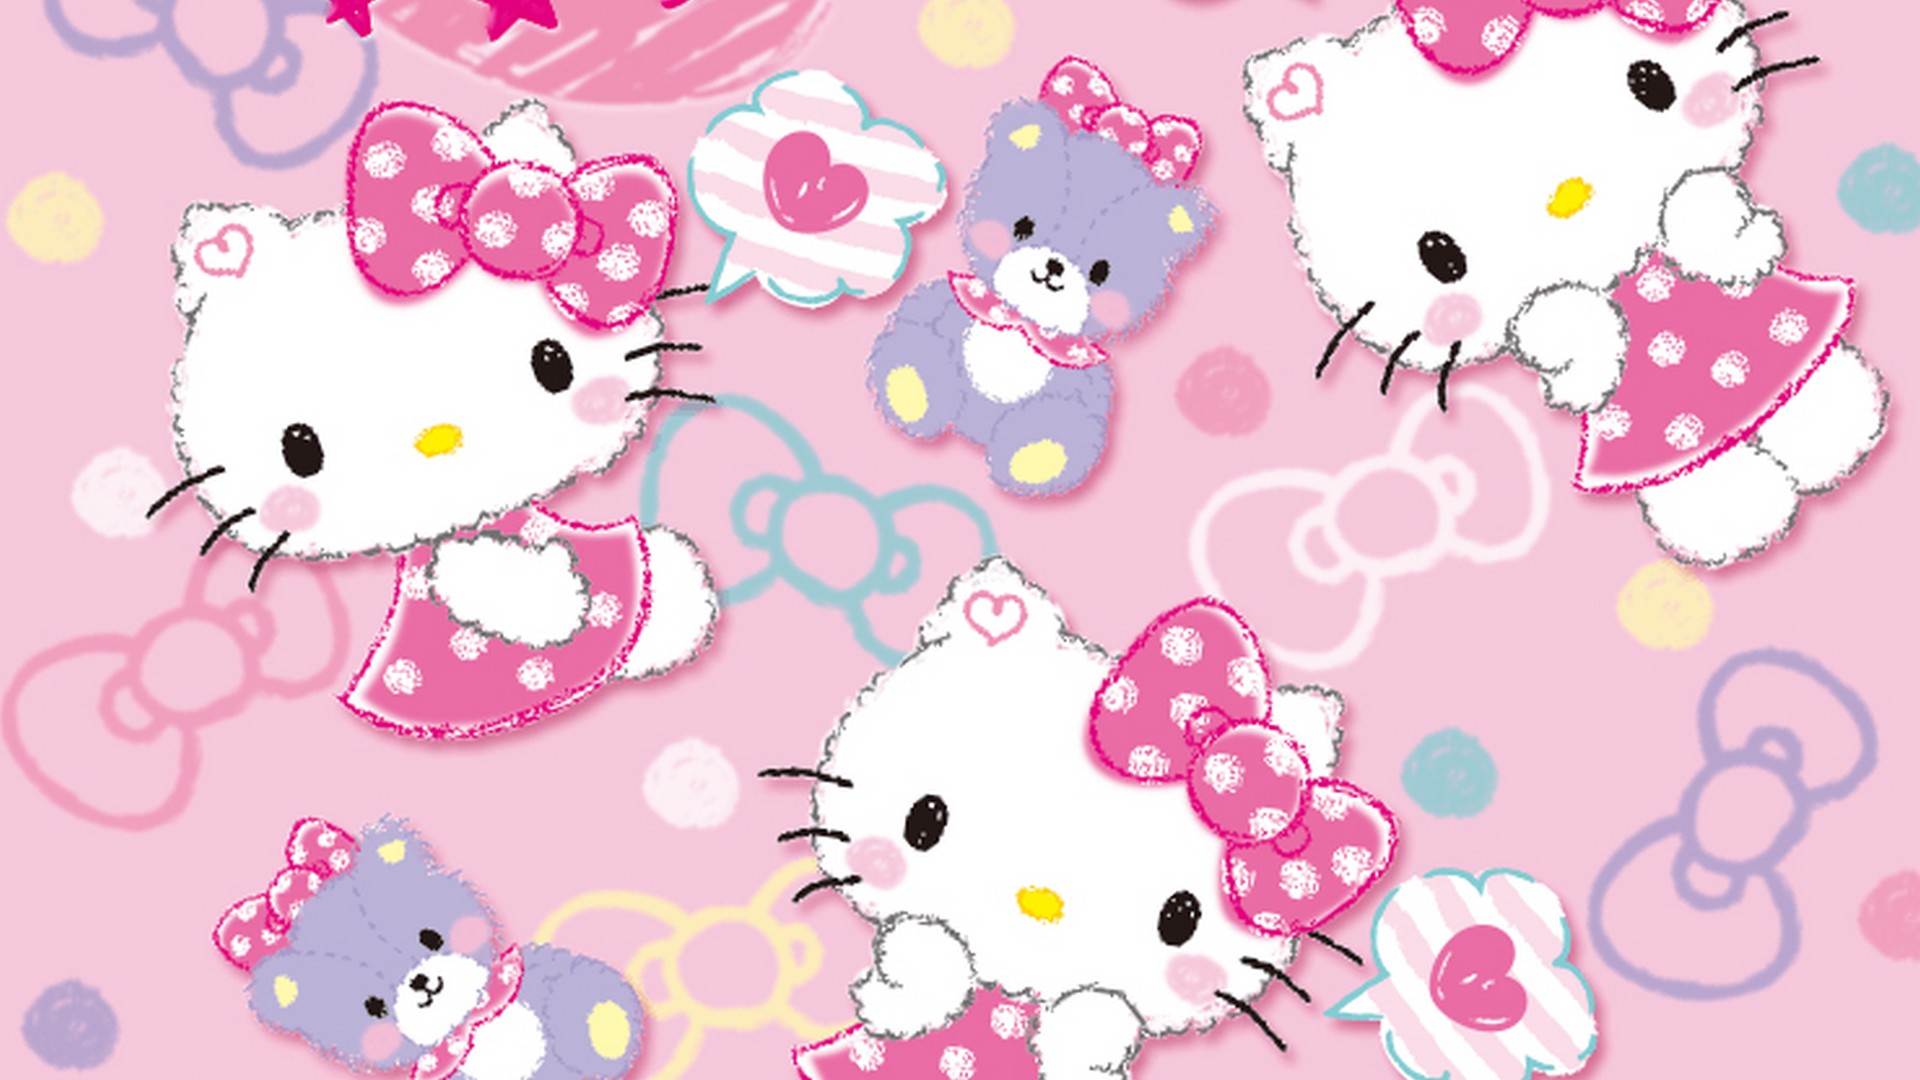 Hello Kitty Characters Background Wallpaper HD with image resolution 1920x1080 pixel. You can make this wallpaper for your Desktop Computer Backgrounds, Mac Wallpapers, Android Lock screen or iPhone Screensavers